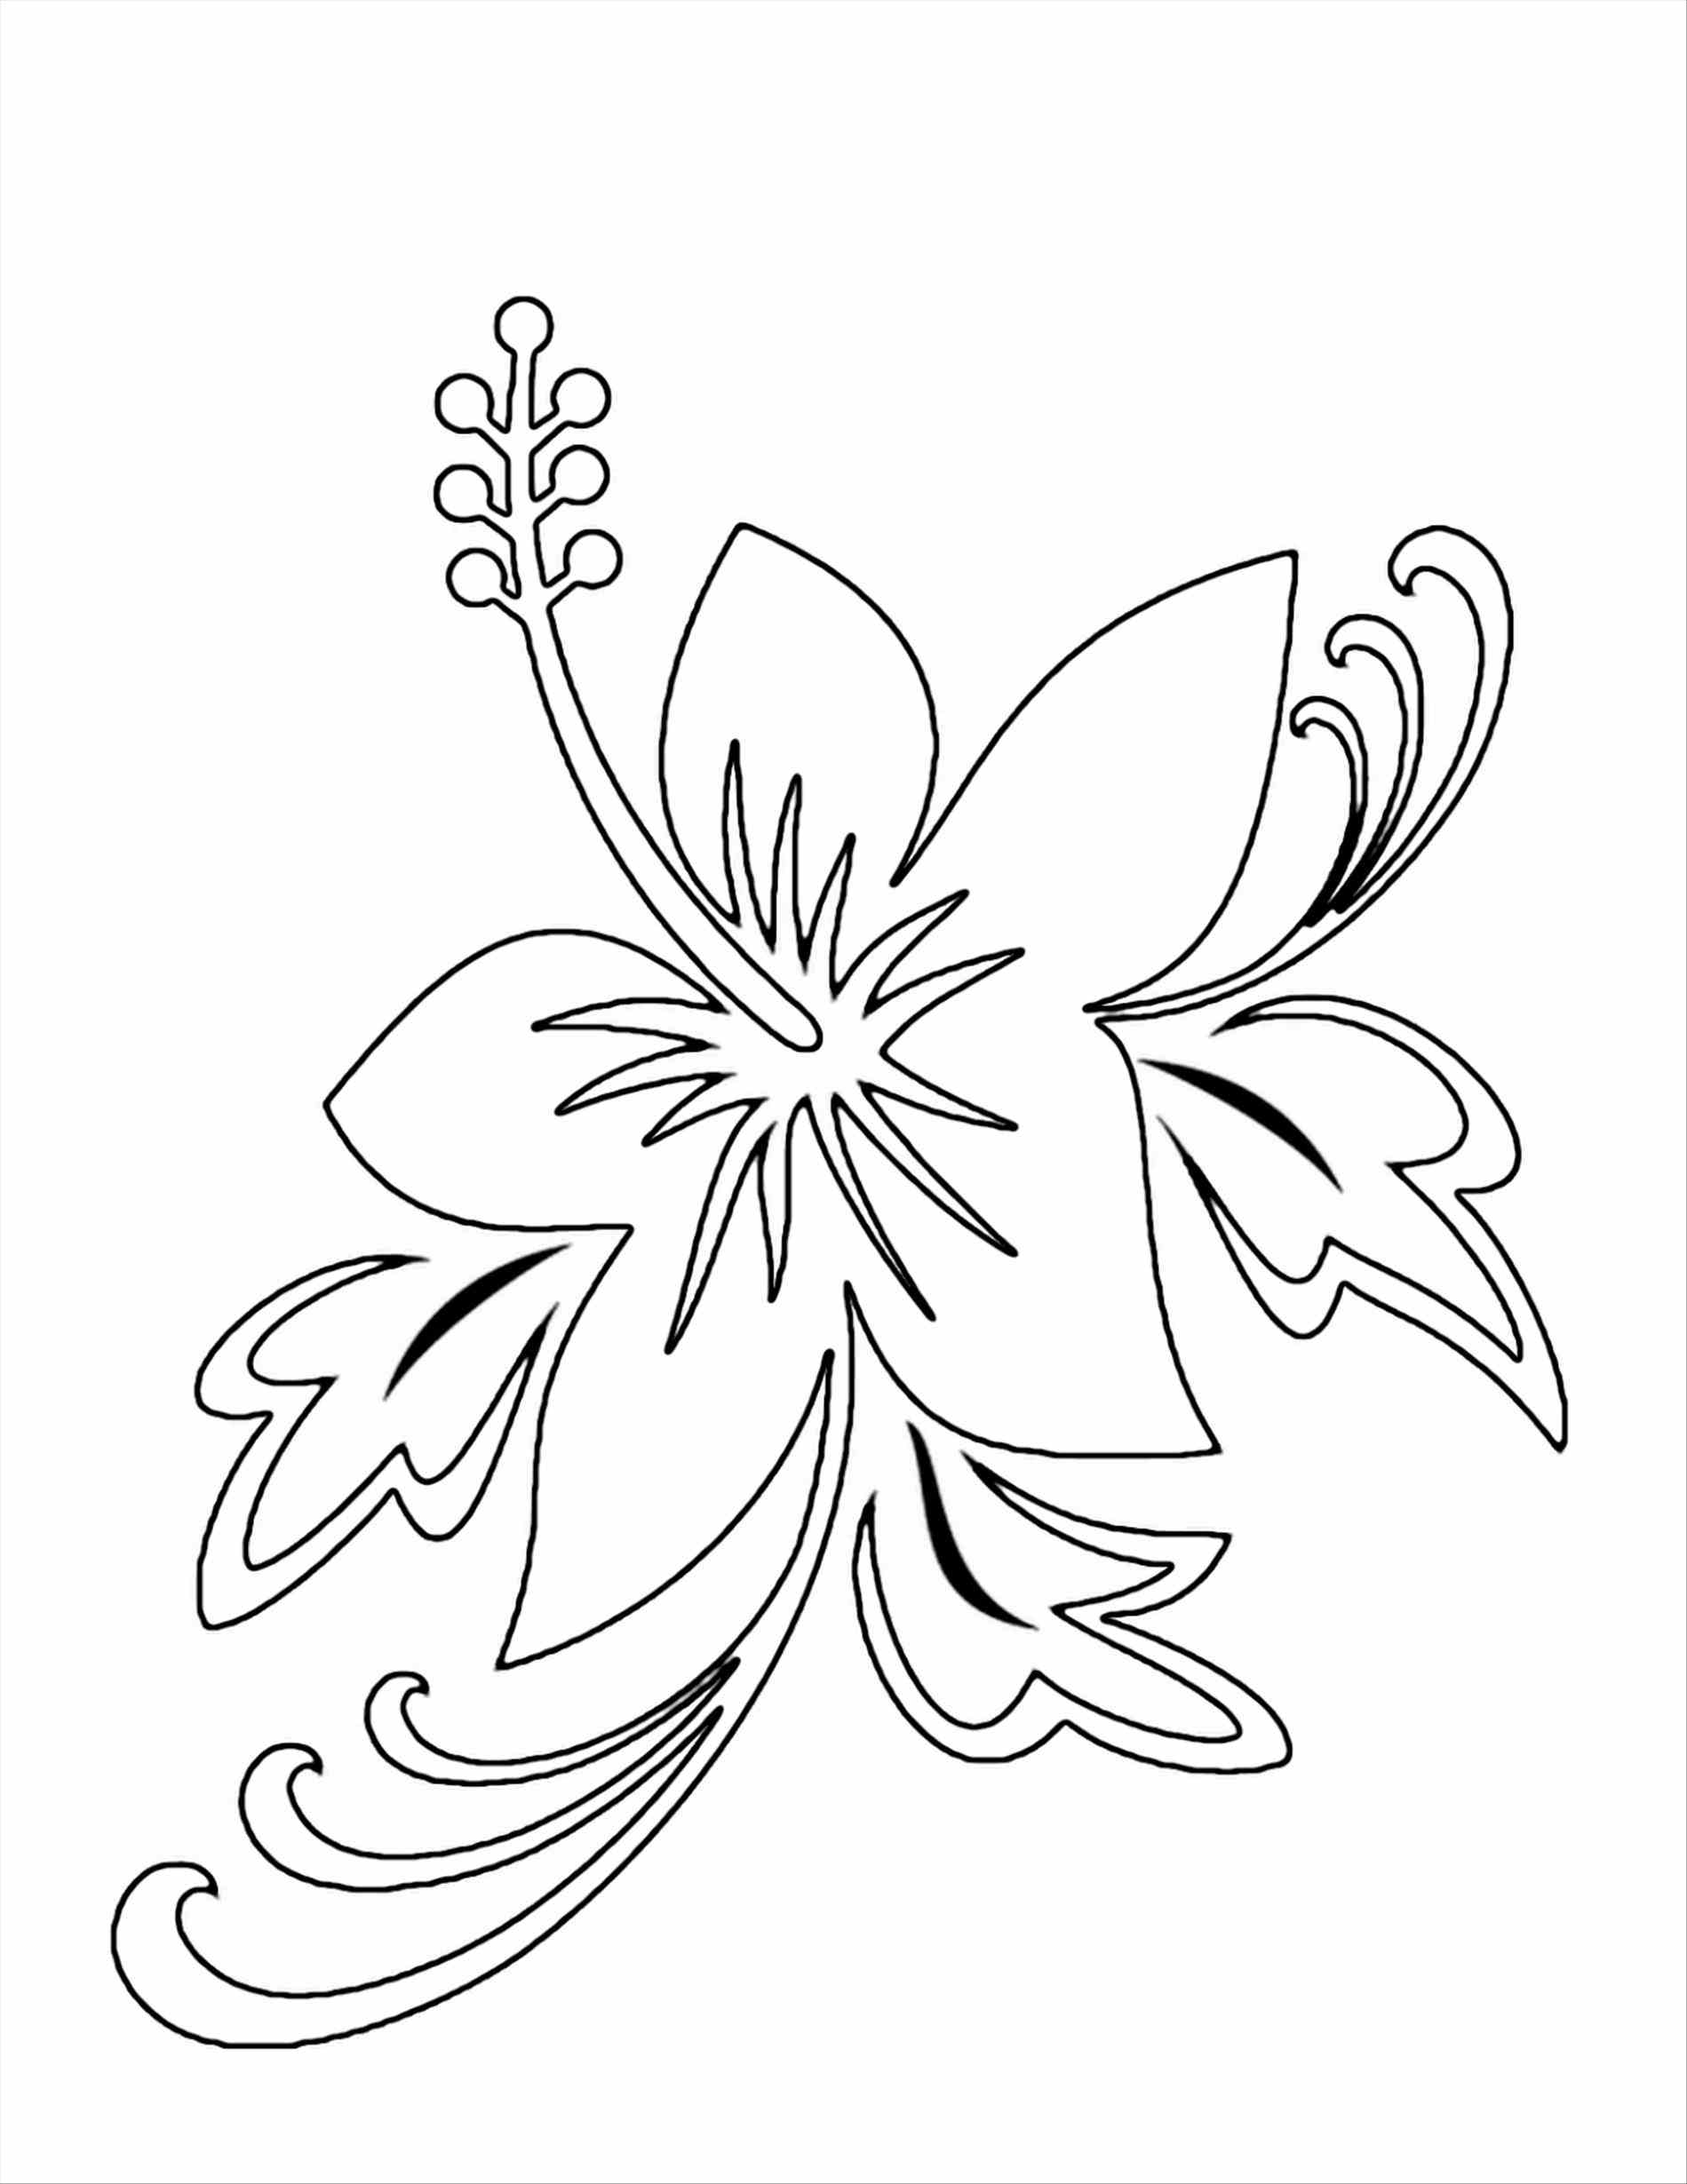 plumeria-flower-coloring-pages-at-getdrawings-free-download